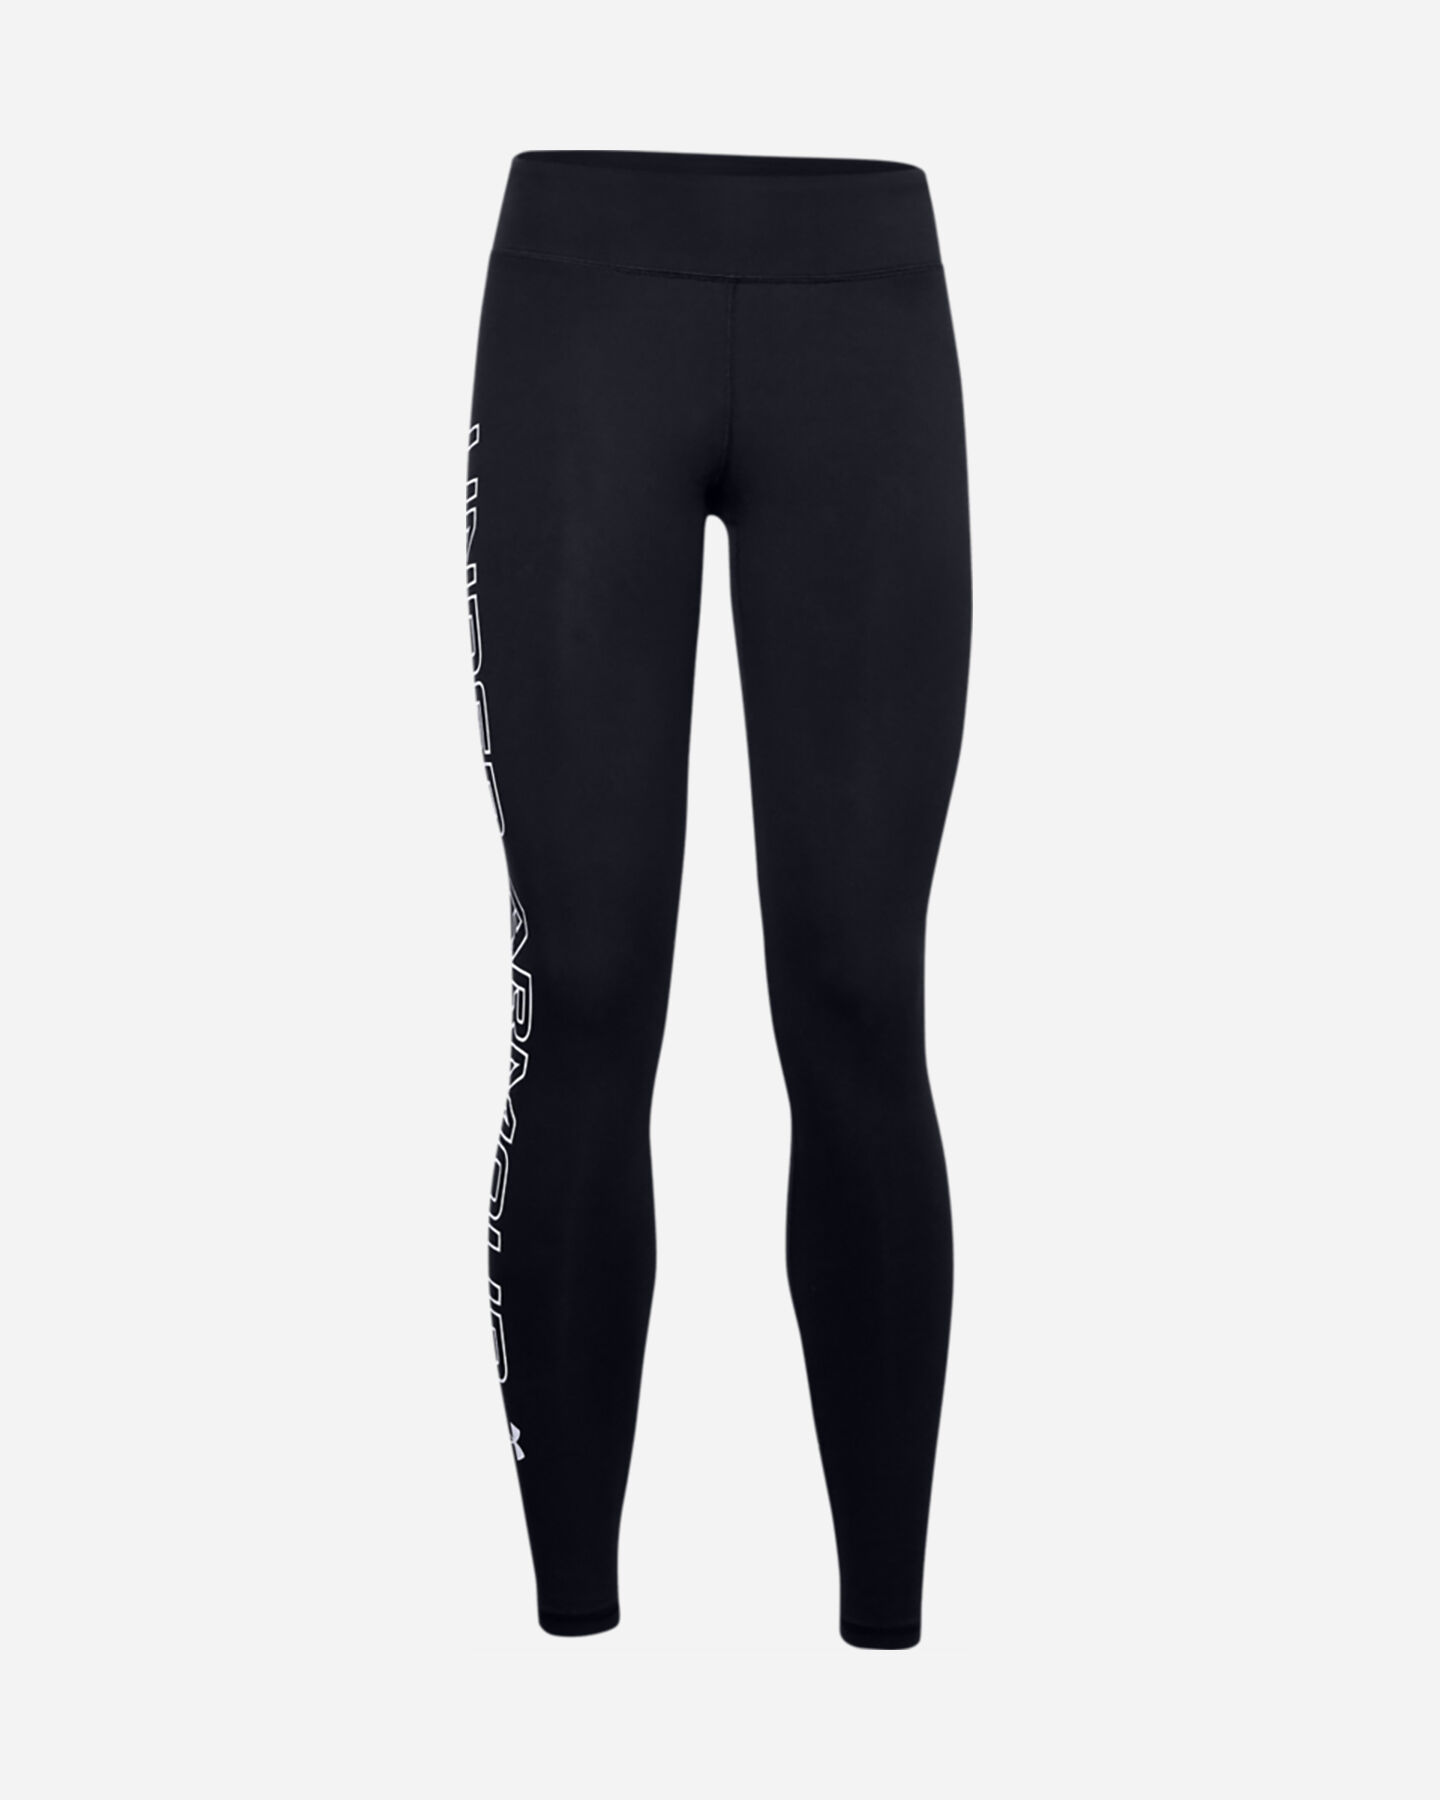  Leggings UNDER ARMOUR BIG LOGO LATERAL W S5229249 scatto 0